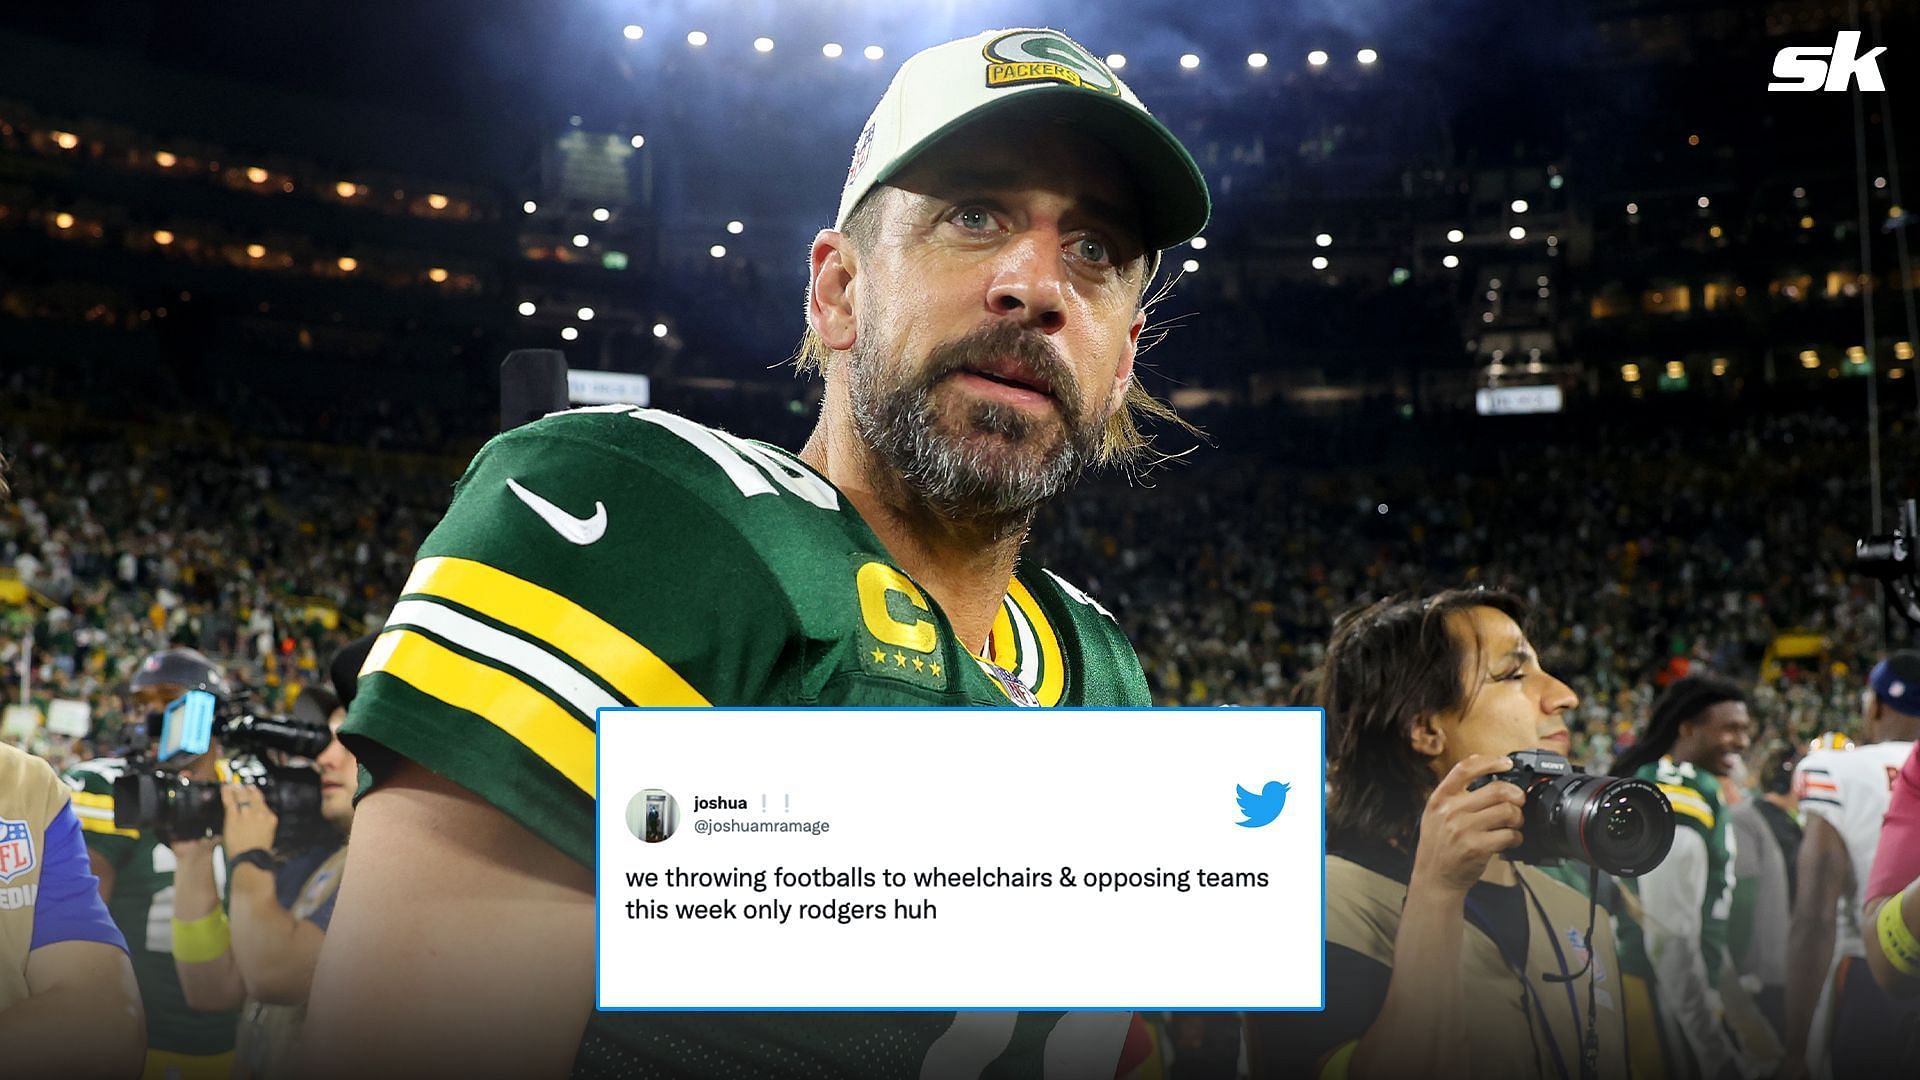 Fans react to Aaron Rodgers potentially missing weapons against Tom Brady